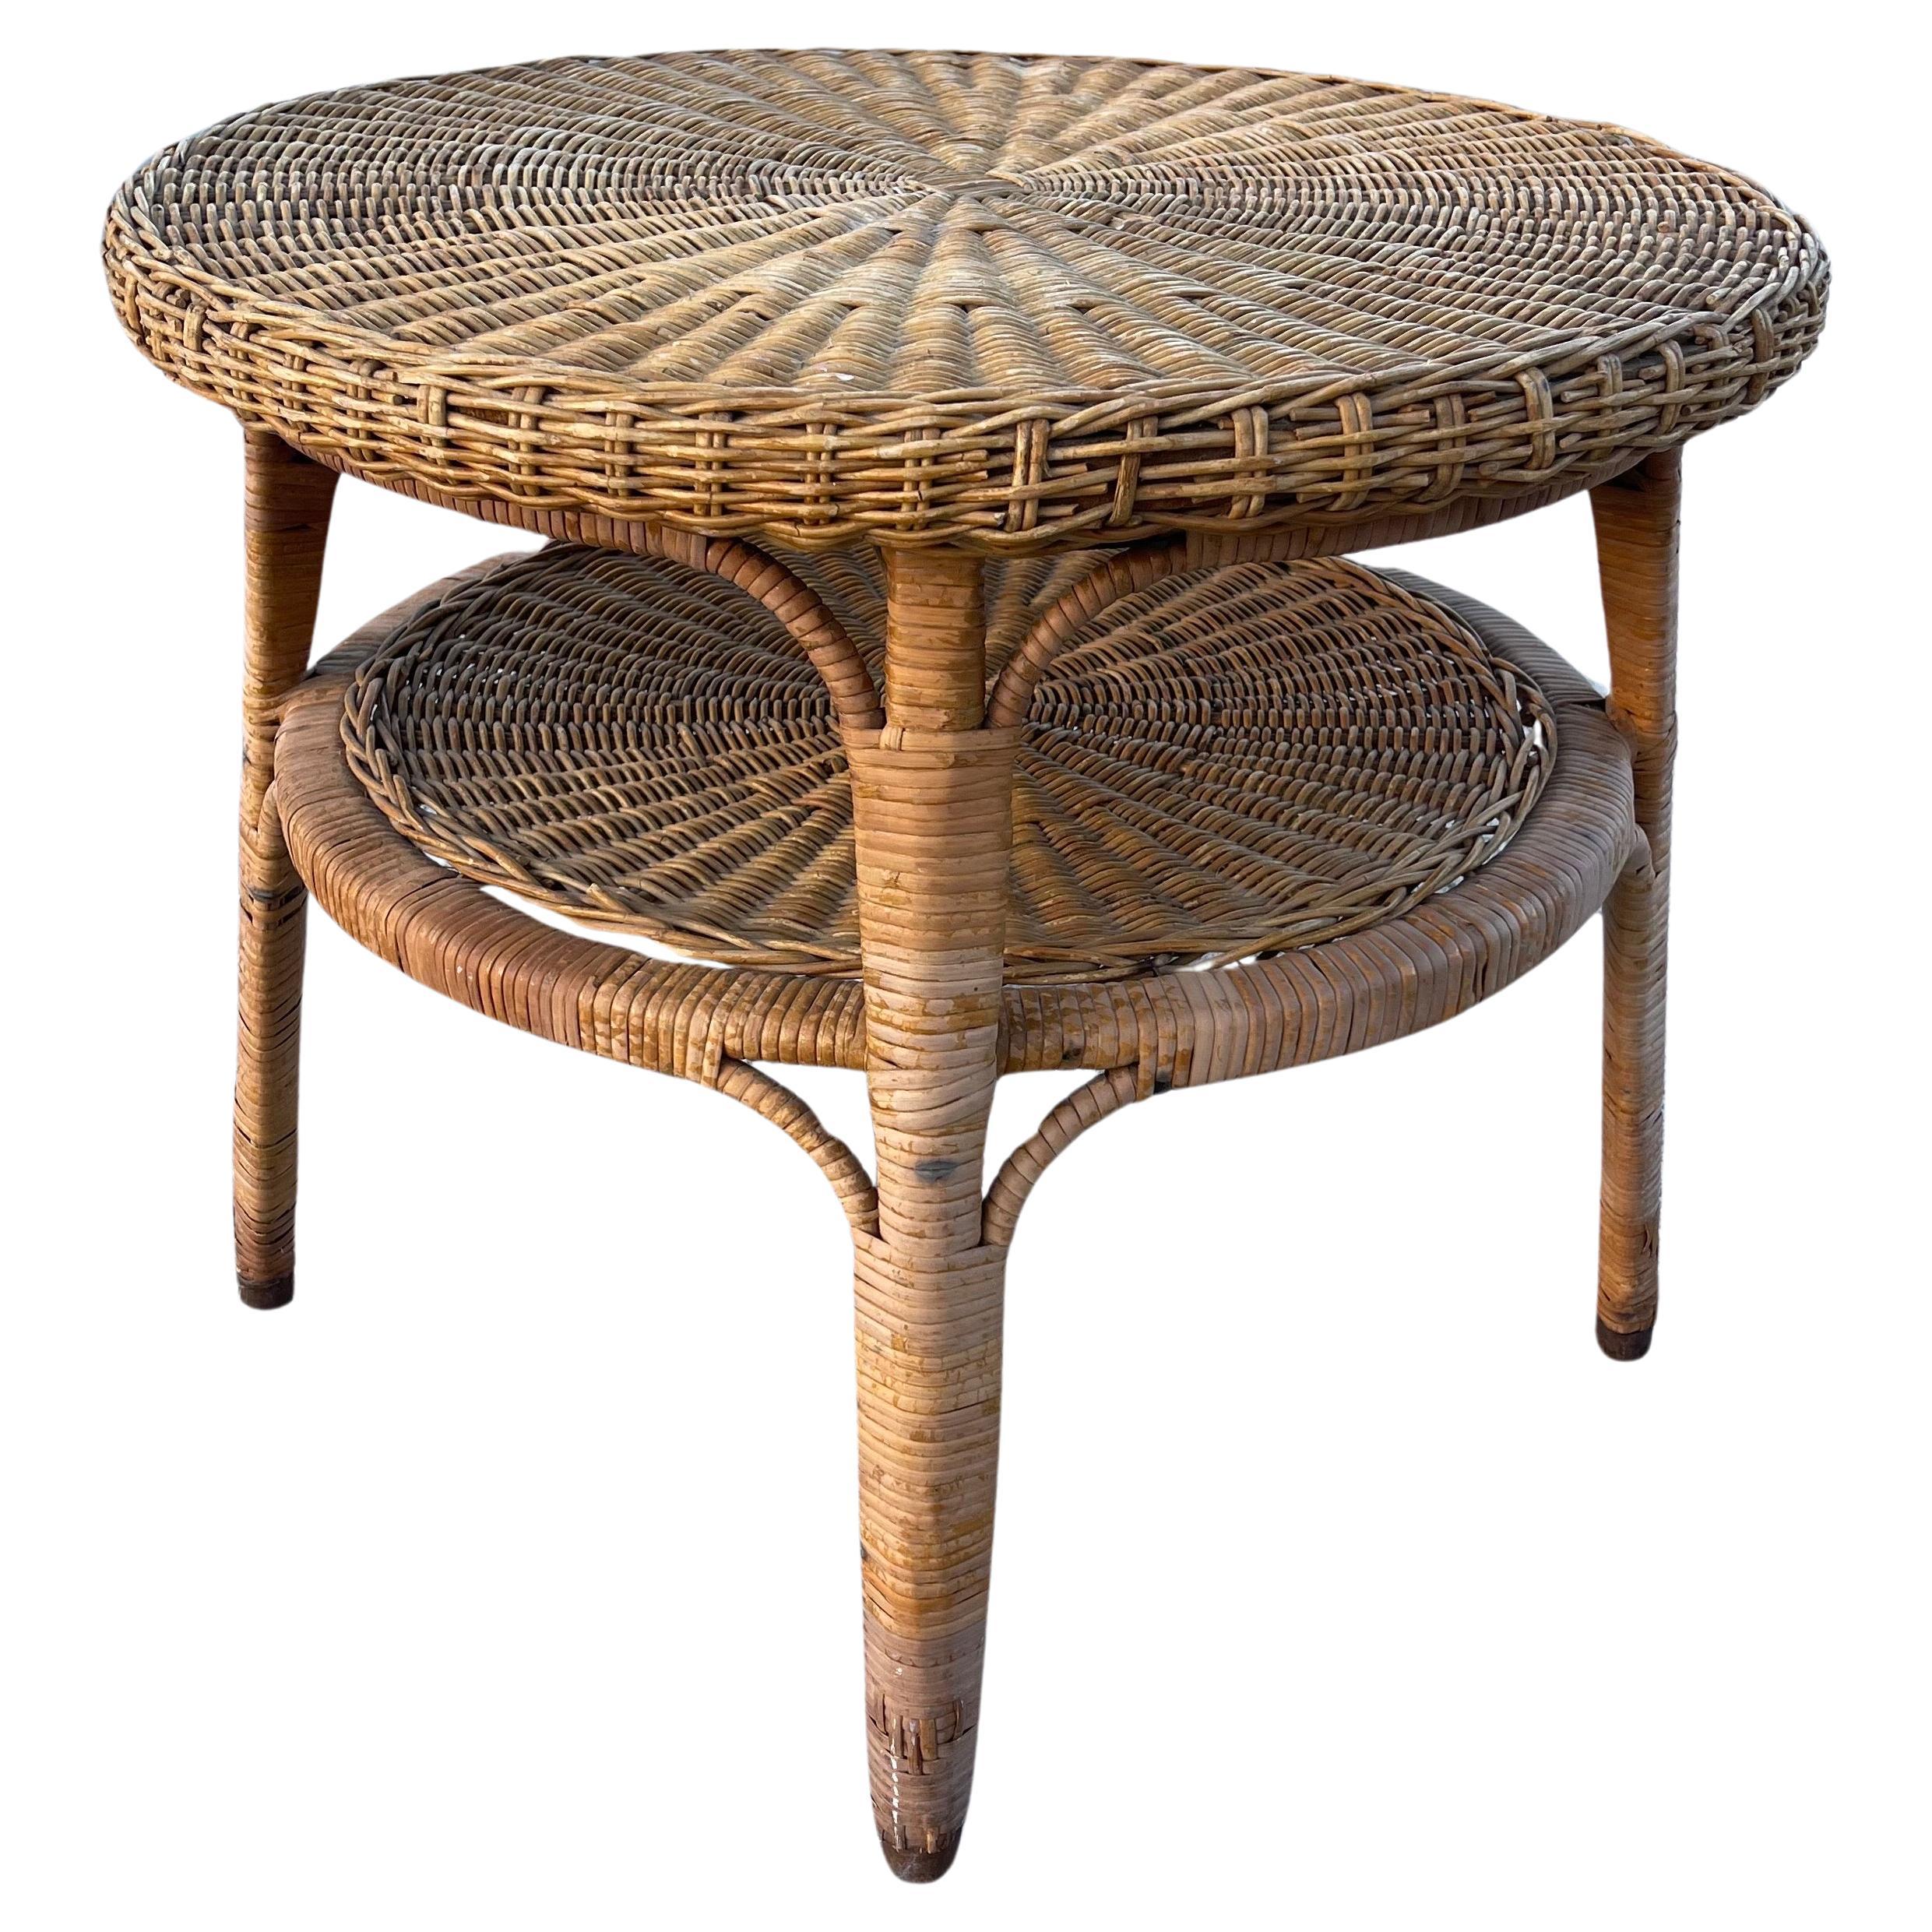 Mid-20th Century Woven Wicker Rattan Round Side or Small Coffee Table For Sale